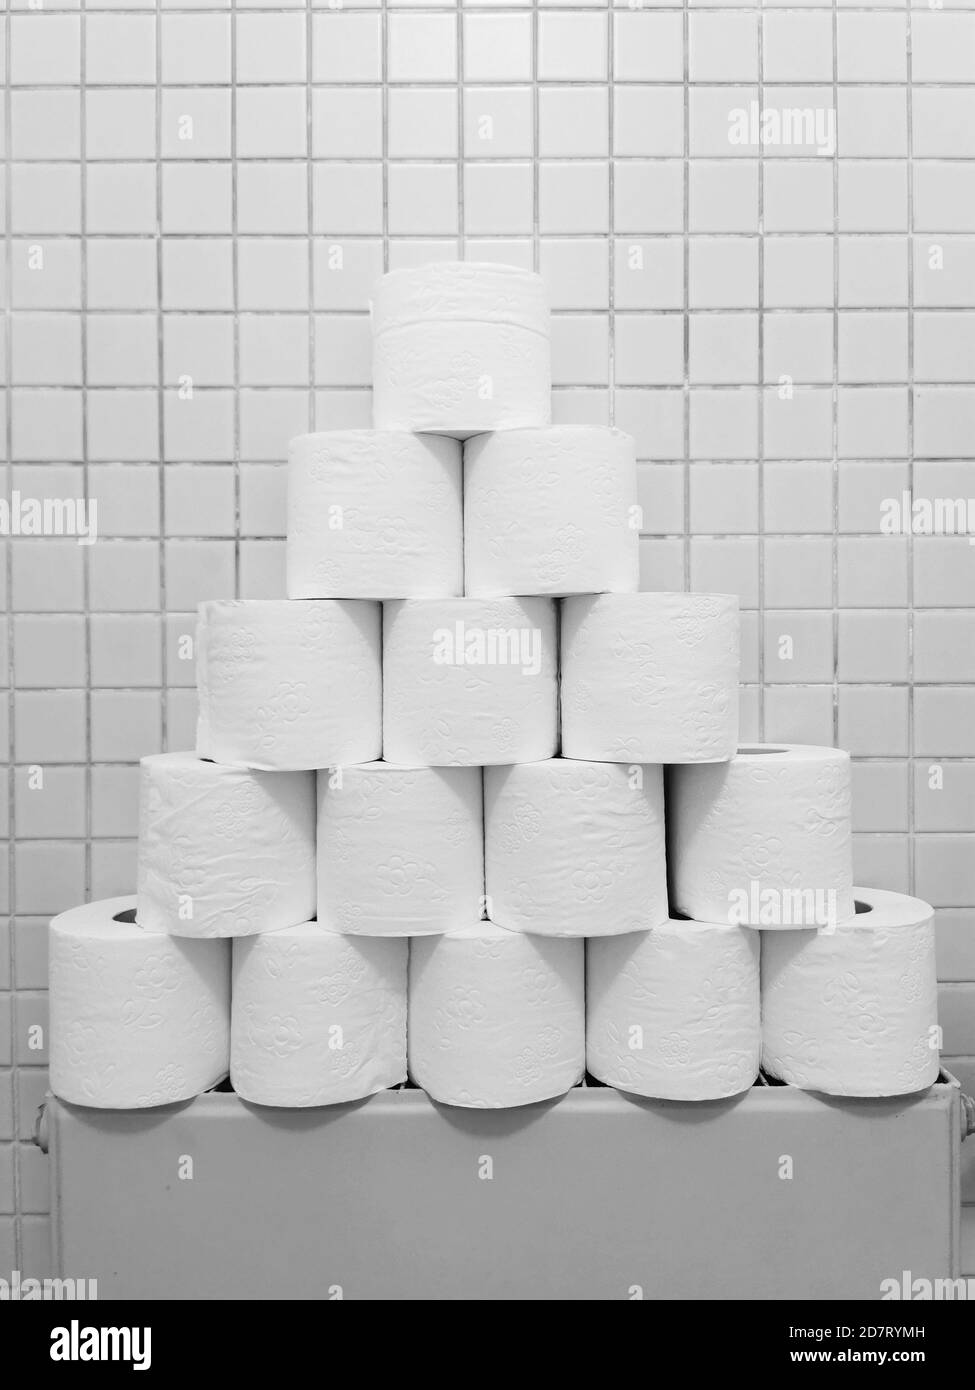 corona scenery showing a pyramid of toilet rolls in a lavatory Stock Photo